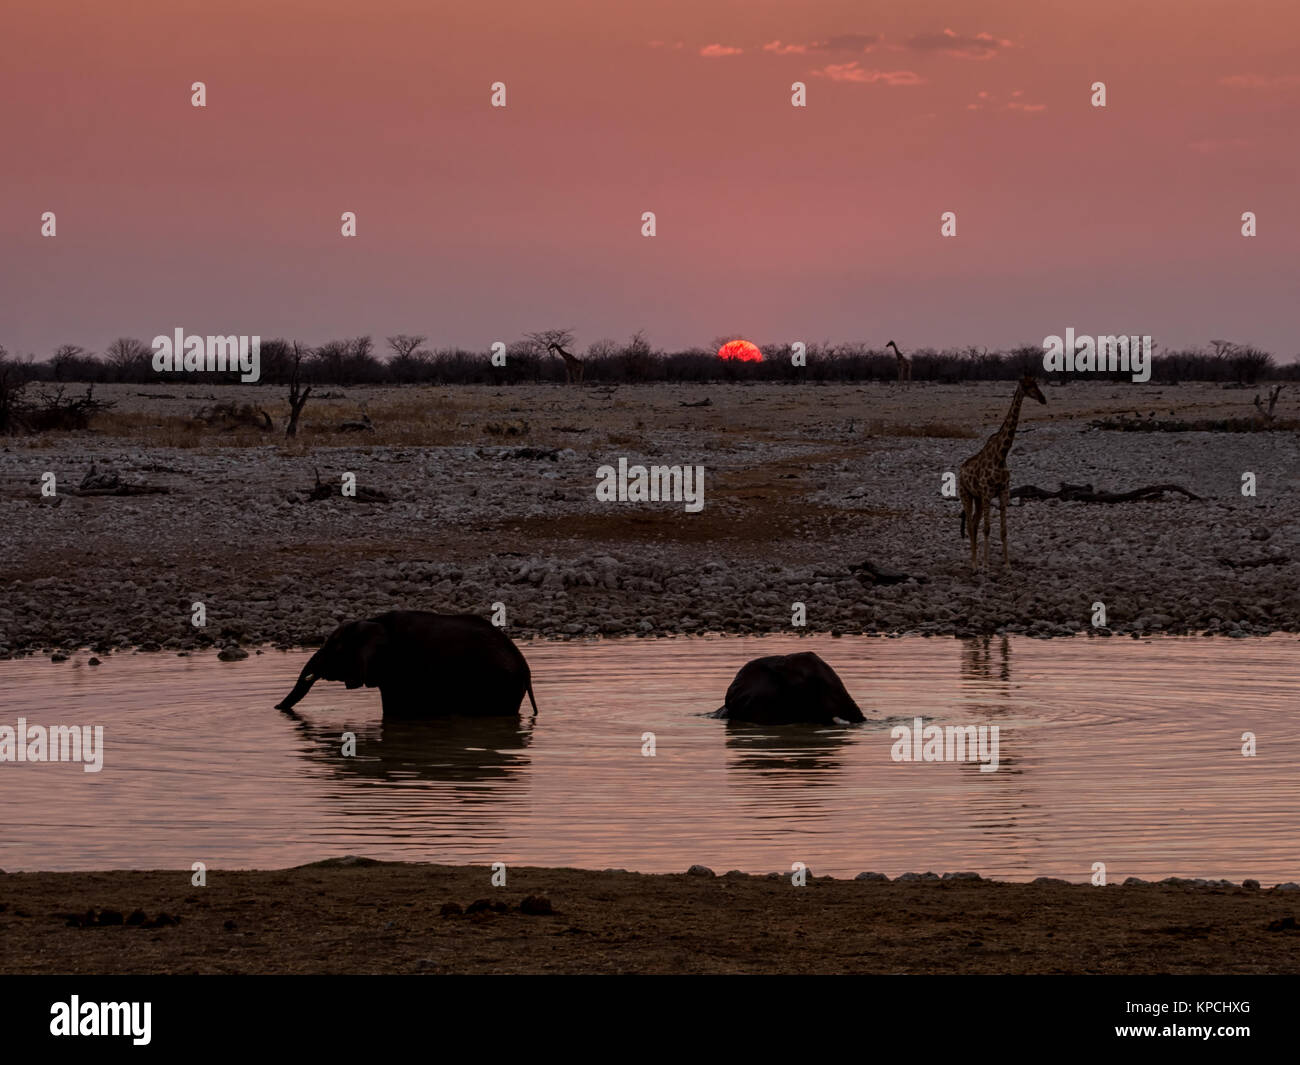 Elephants in a watering hole at sunset Stock Photo